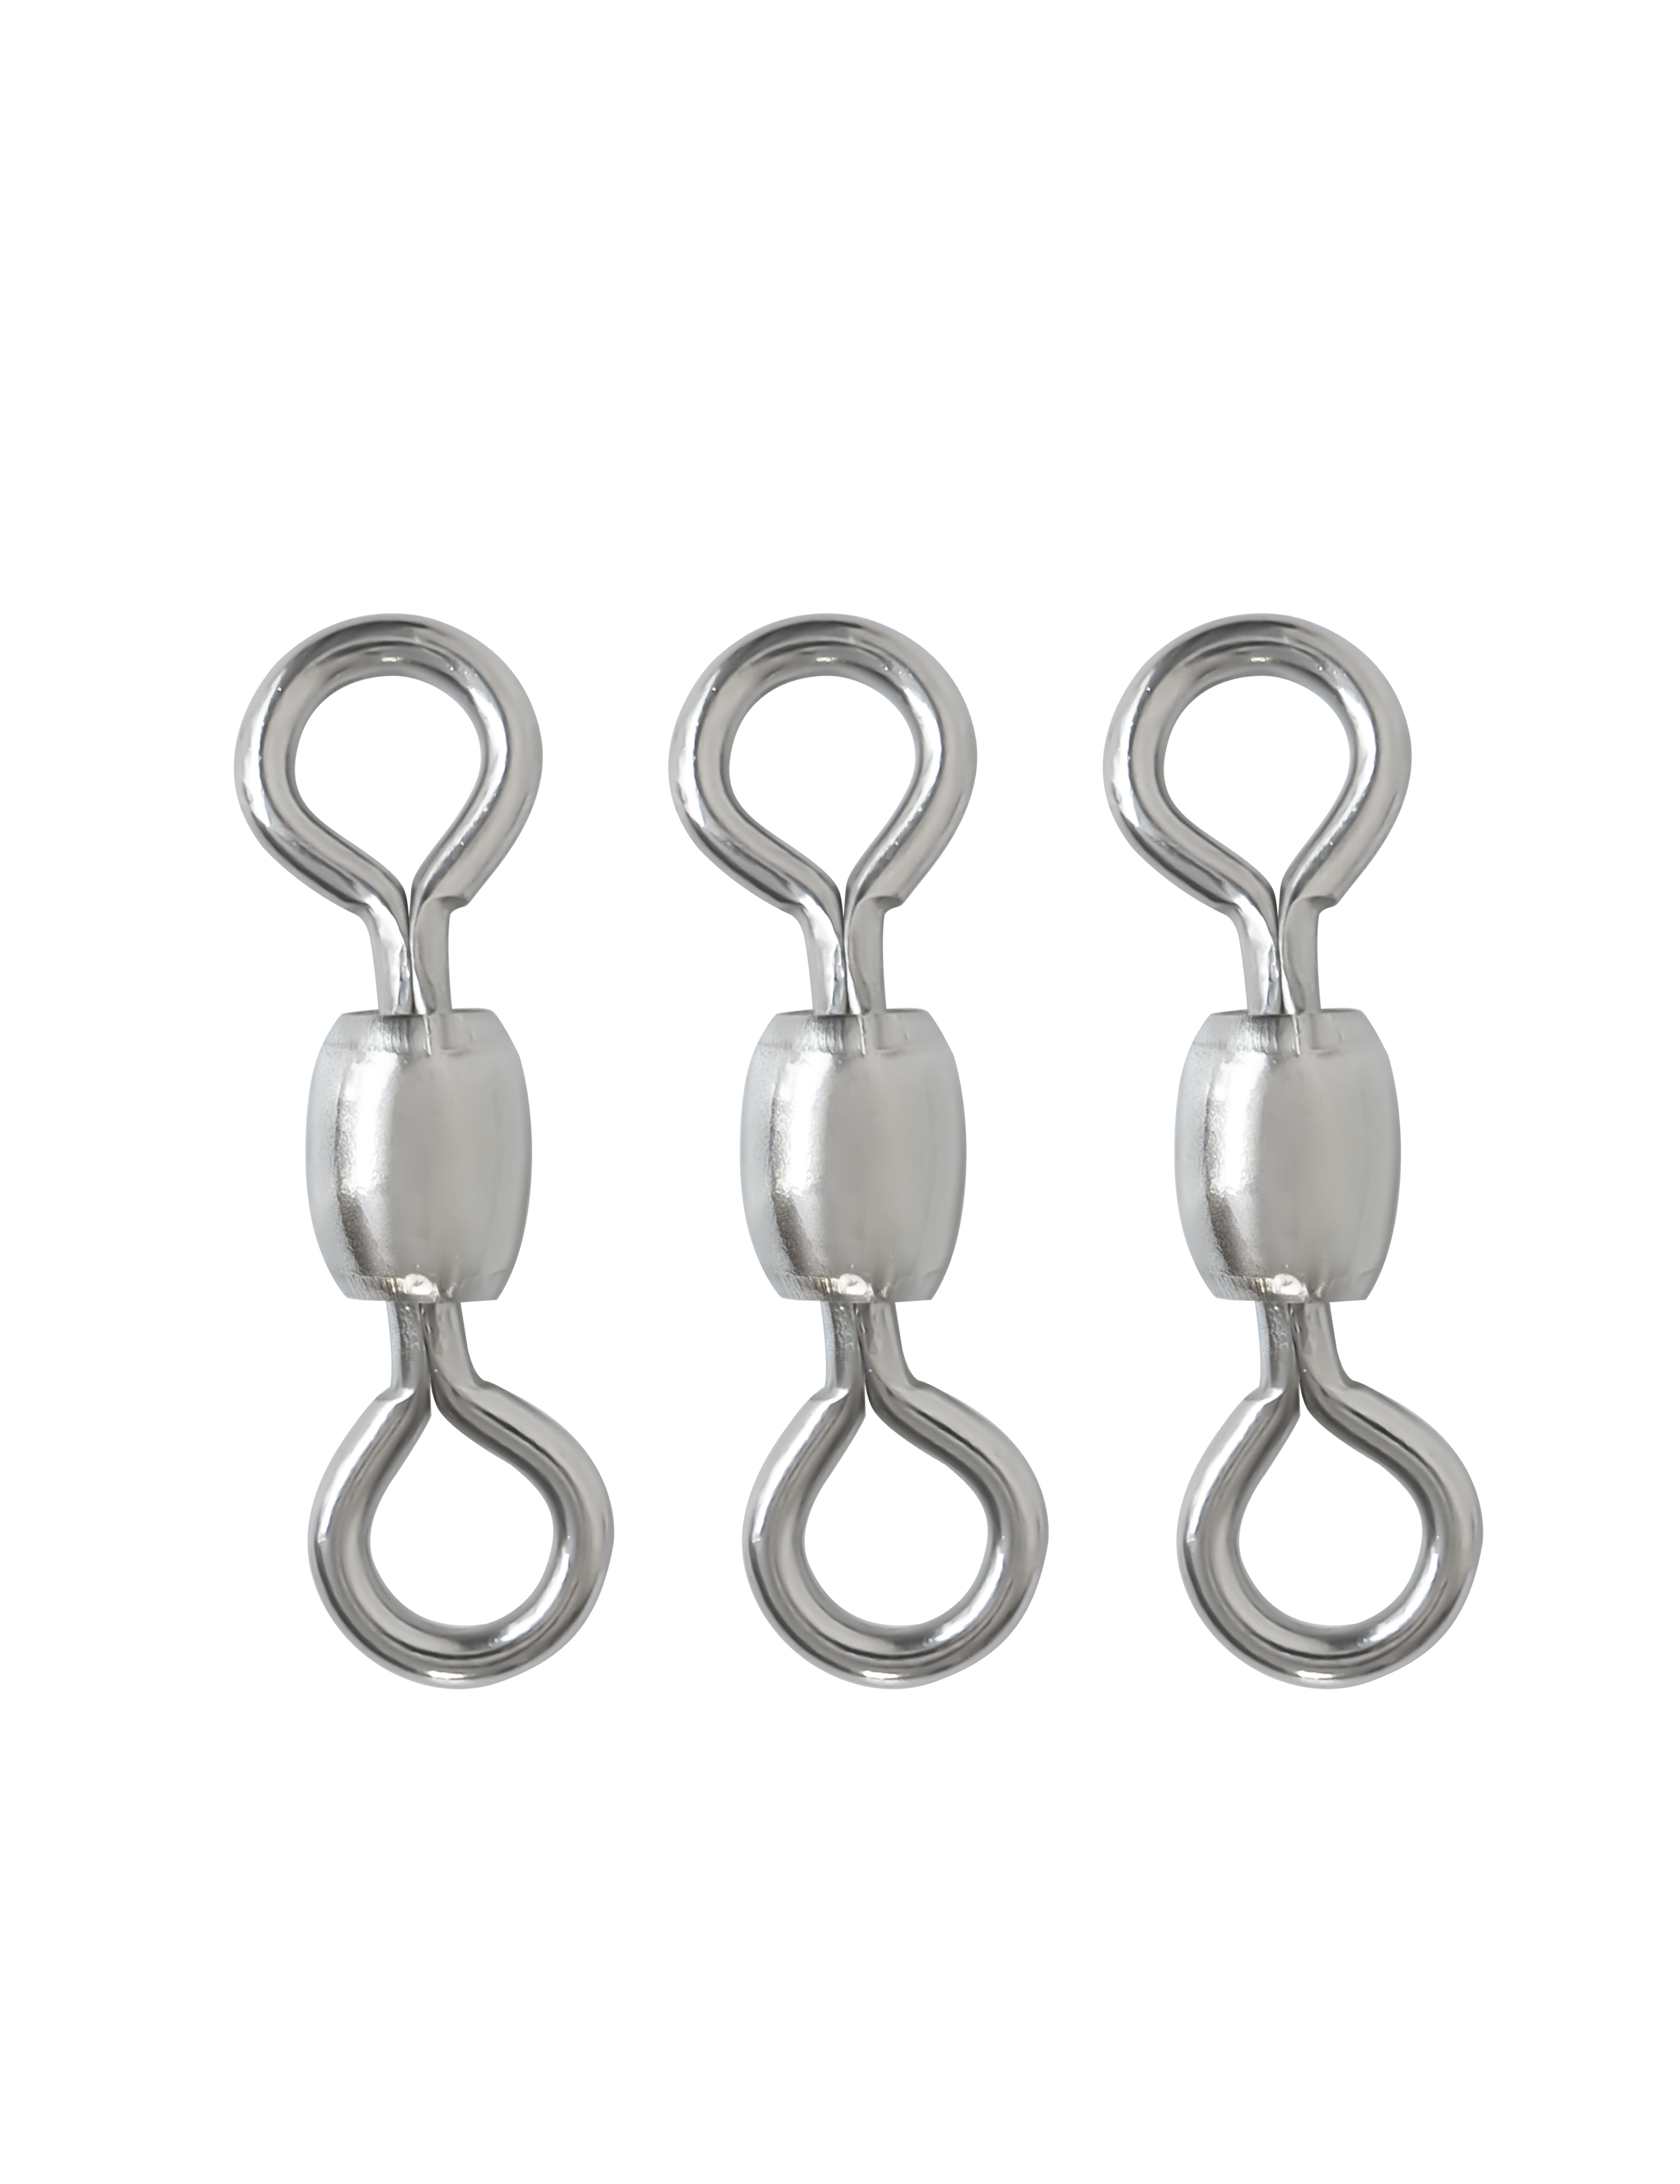 BLUEWING High Strength Stainless Steel Swivel